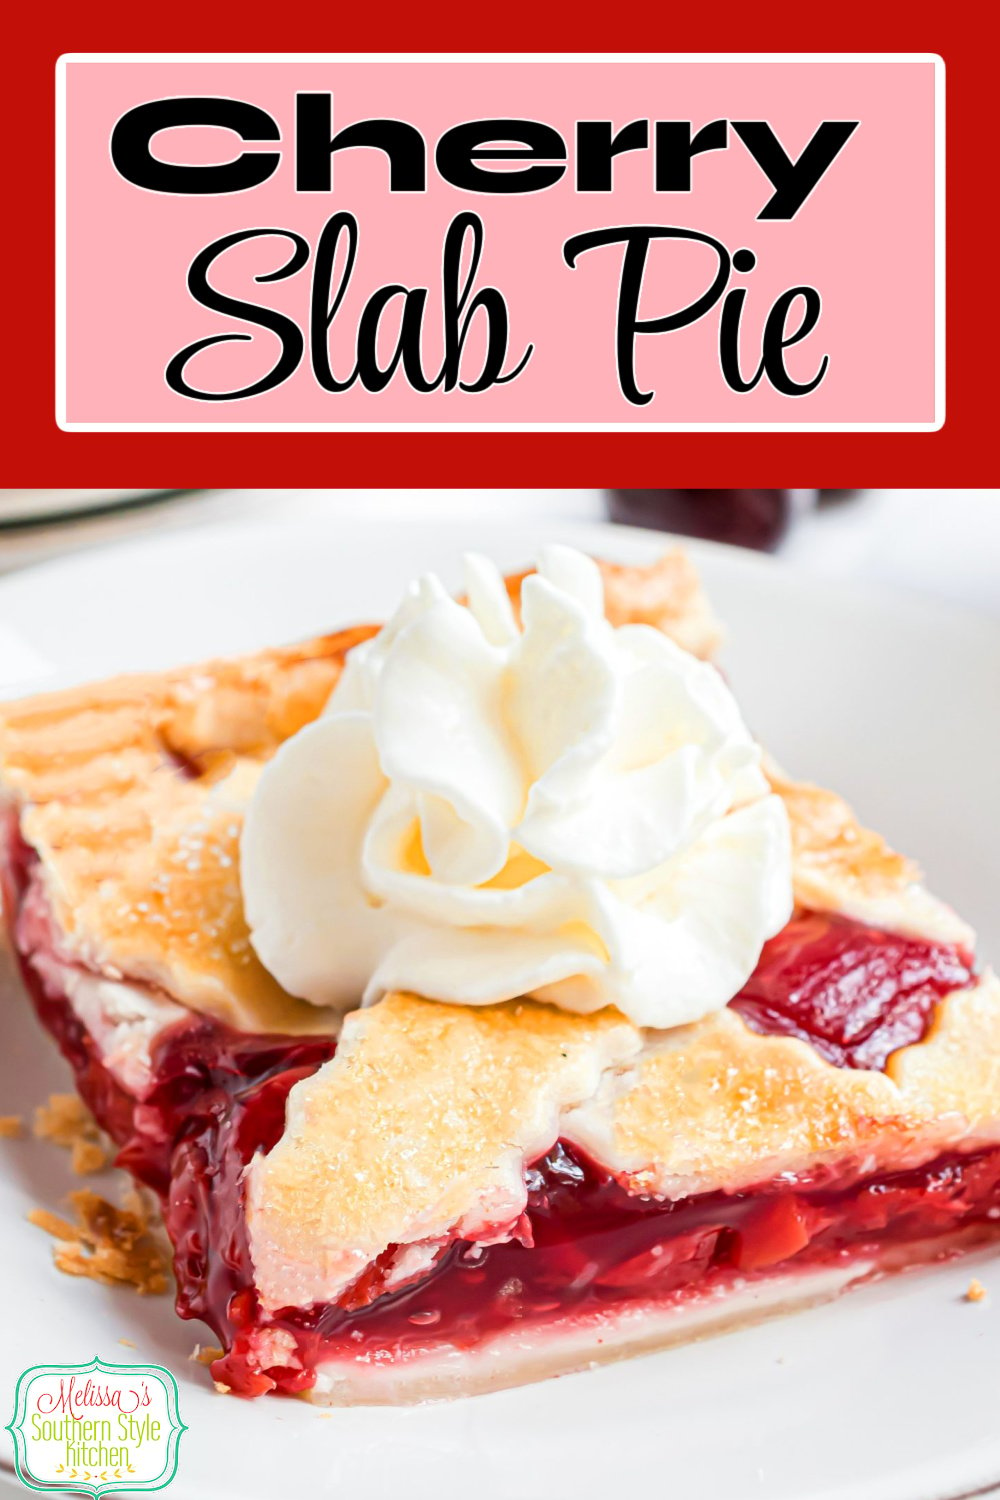 This Easy Cherry Slab Pie recipe can be served with vanilla ice cream or whipped cream making it ideal for larger gatherings. #cherrypie #cherryslabpie #slabpierecipes #memorialdayrecipes #july4th #july4threcipes #easydesserts #bestcherrypie #southernrecipes via @melissasssk